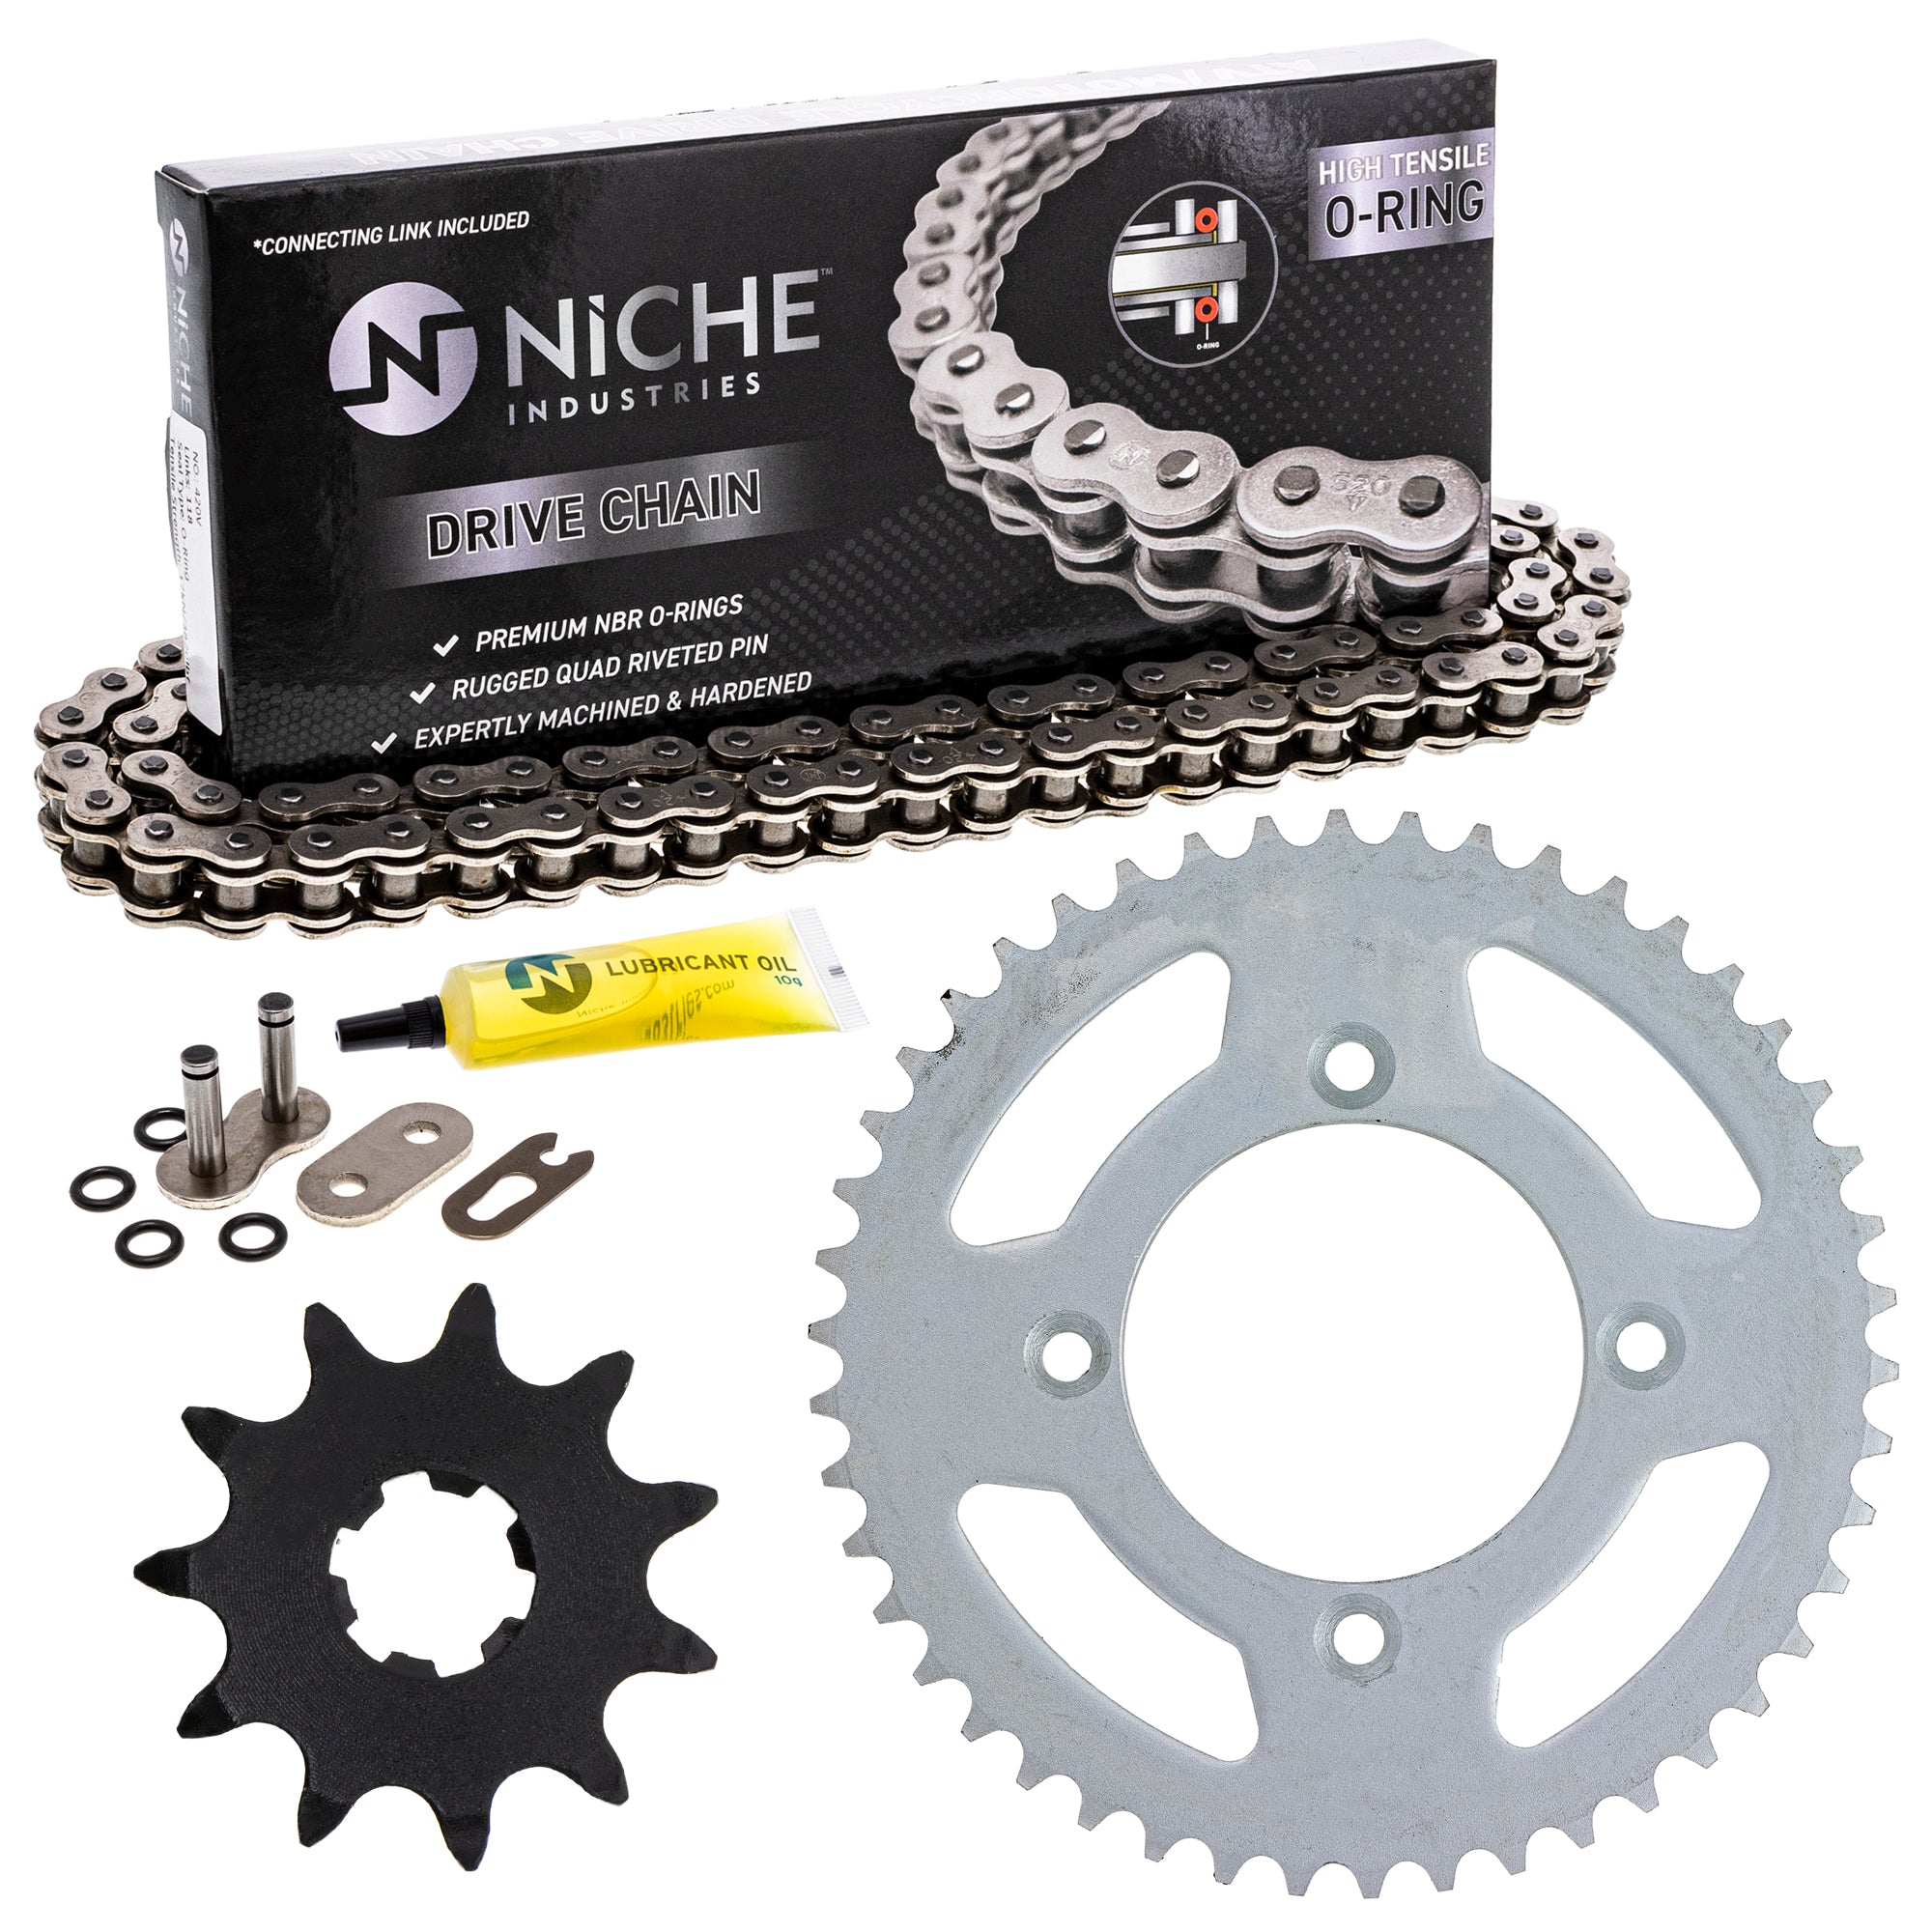 Drive Sprockets & Chain Kit for zOTHER Honda XR80R 405W3-GN1-505 23801-178-000 NICHE MK1004553